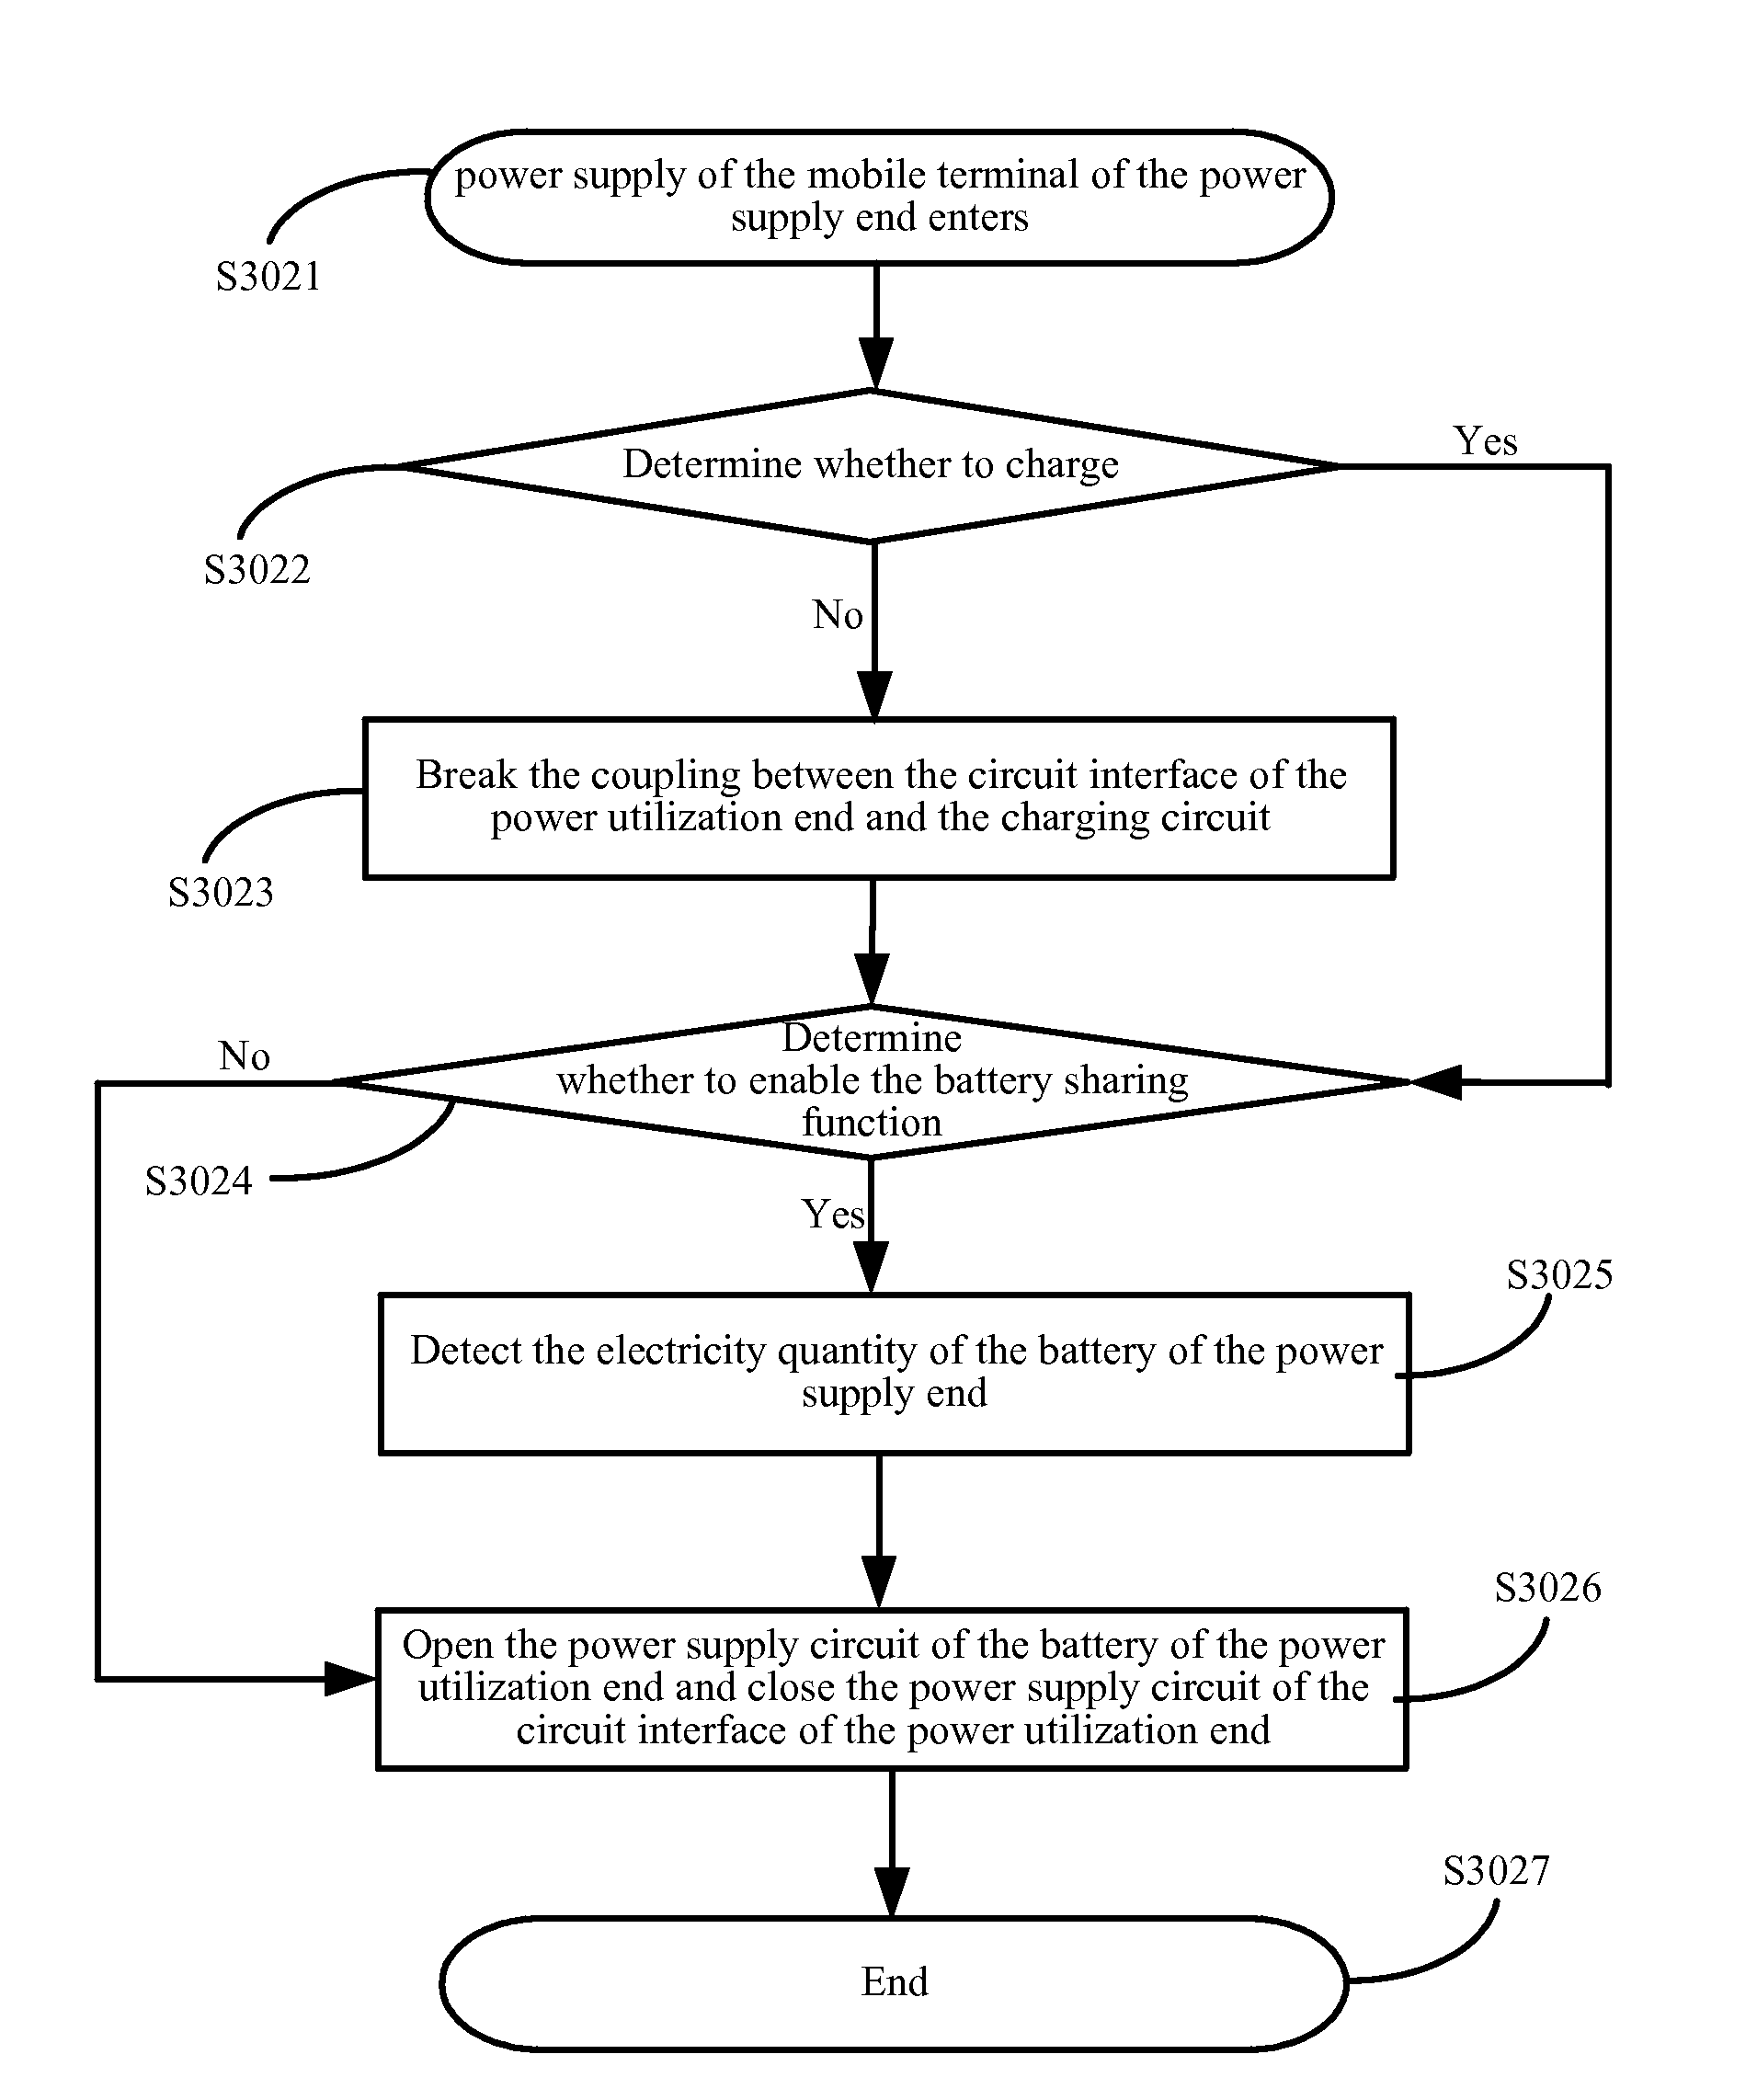 System, method and mobile terminal for sharing battery between mobile terminals